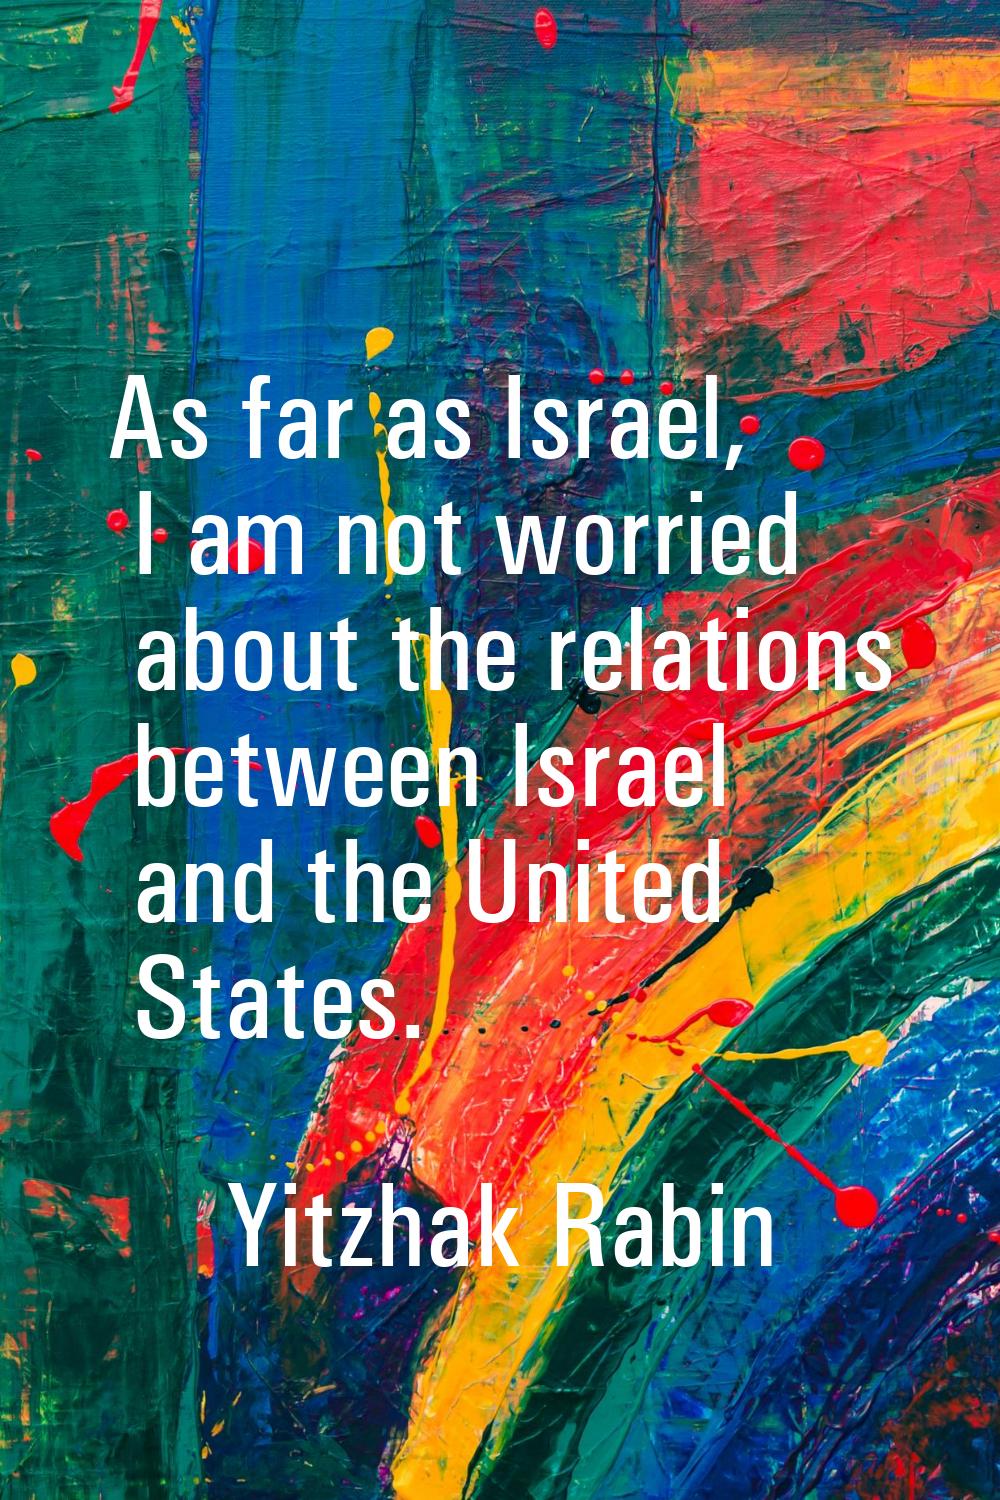 As far as Israel, I am not worried about the relations between Israel and the United States.